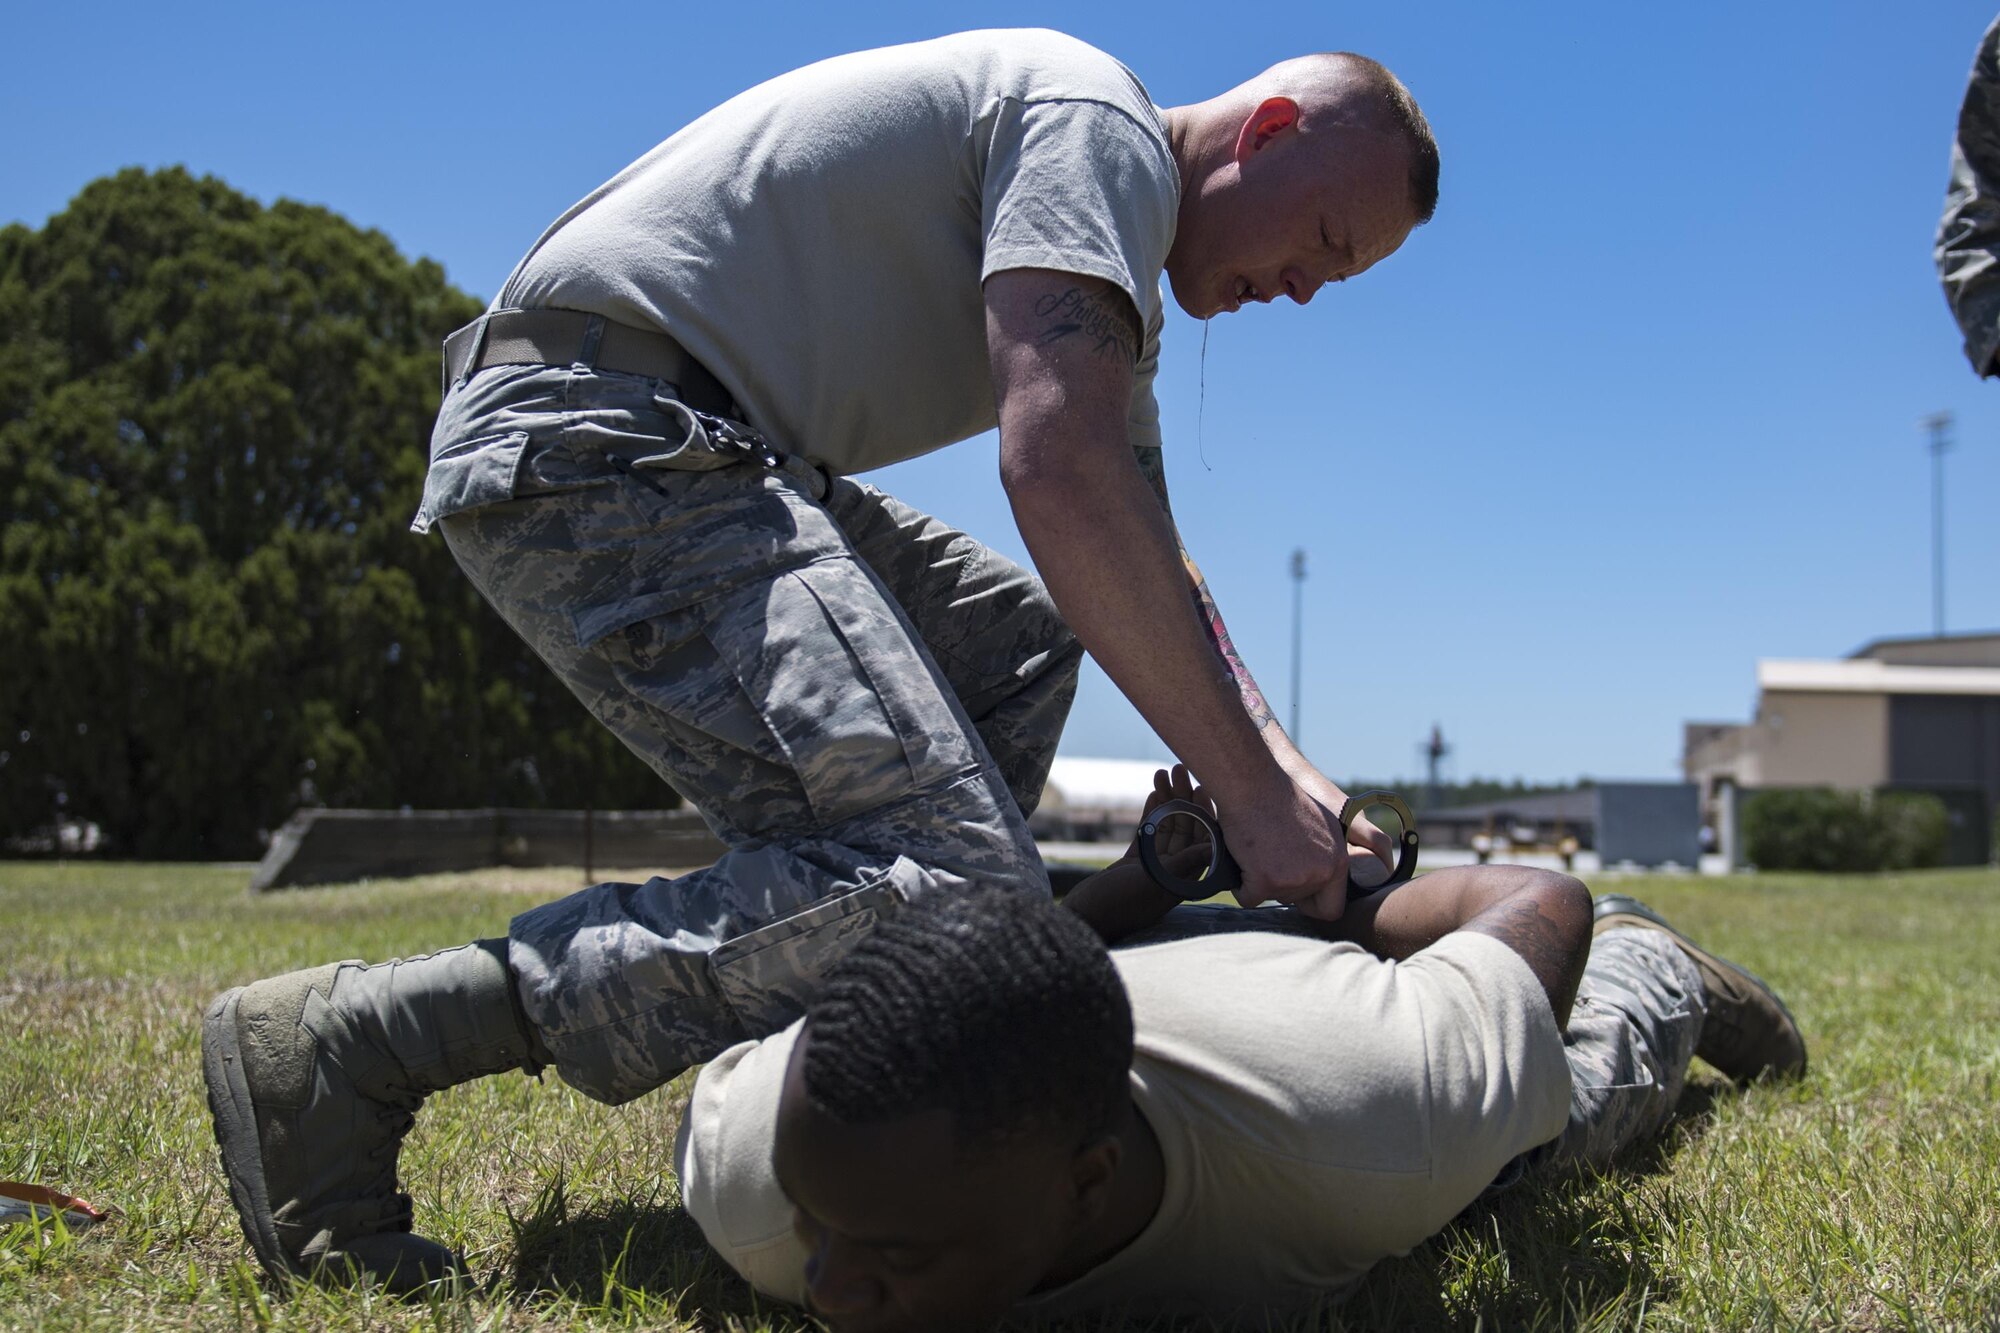 Airman 1st Class Hunter Ogle, 23d Security Forces Squadron entry controller, hand-cuffs Senior Airman Brandon Miles, Senior Airman Brandon Mile, 23d SFS unit trainer, after being sprayed in the face with oleoresin capsicum spray, also known as pepper spray, during an initial confidence course, May 2, 2017 at Moody Air Force Base, Ga. Airmen must complete a class then pass a physical confidence course while experiencing the effects of oleoresin capsicum spray to be qualified to carry the less-than-lethal tool. (Air Force photo by Airman 1st Class Daniel Snider)